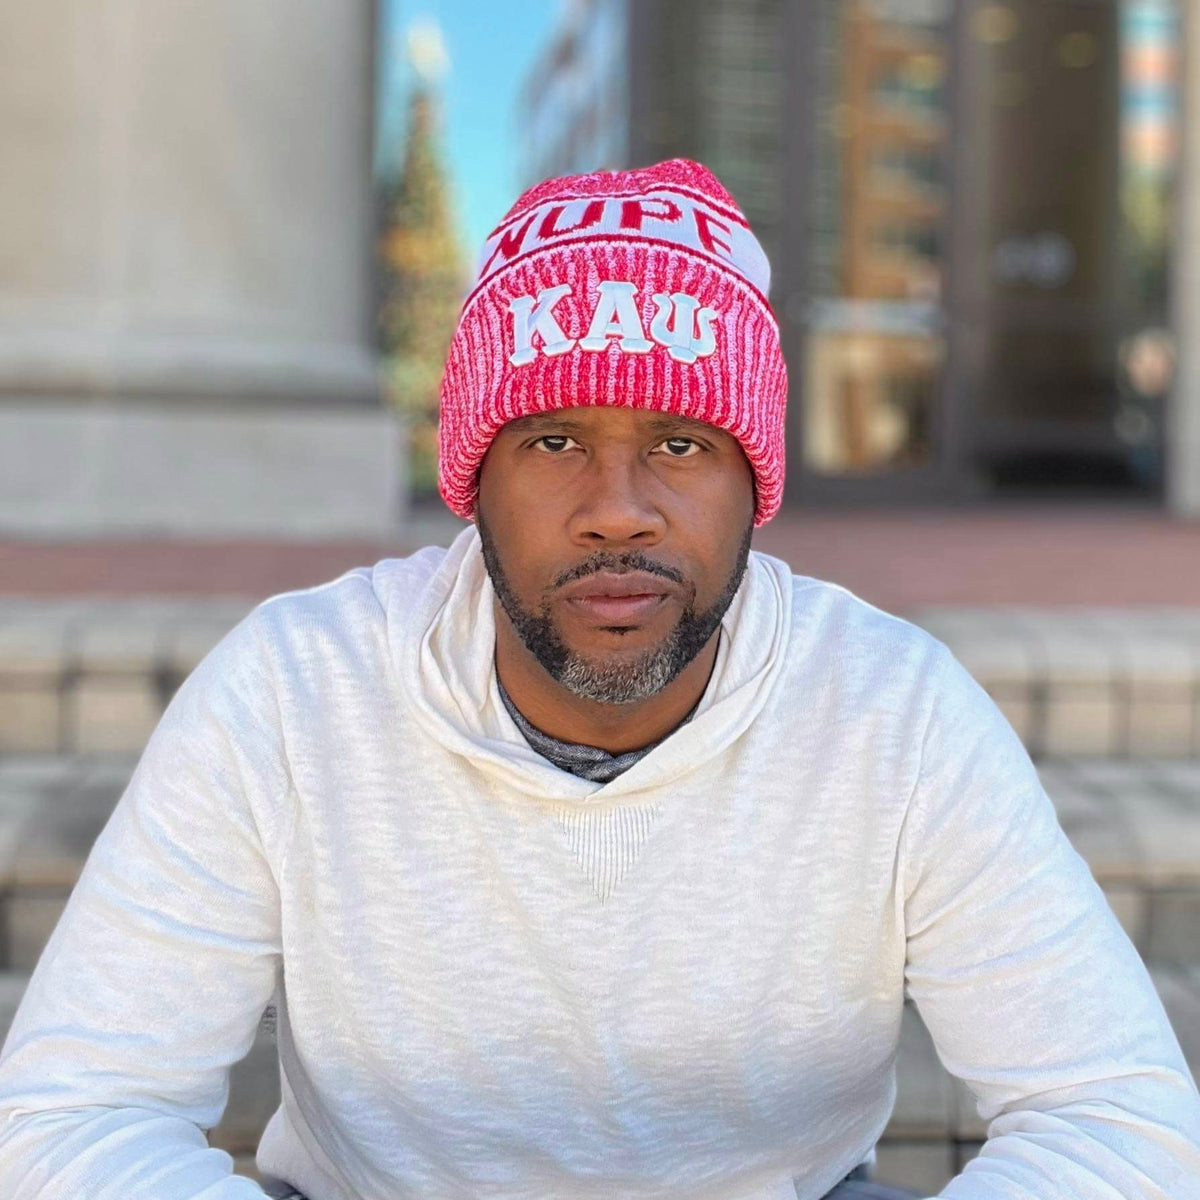 The – Kappa Hat Collection King Beanie McNeal